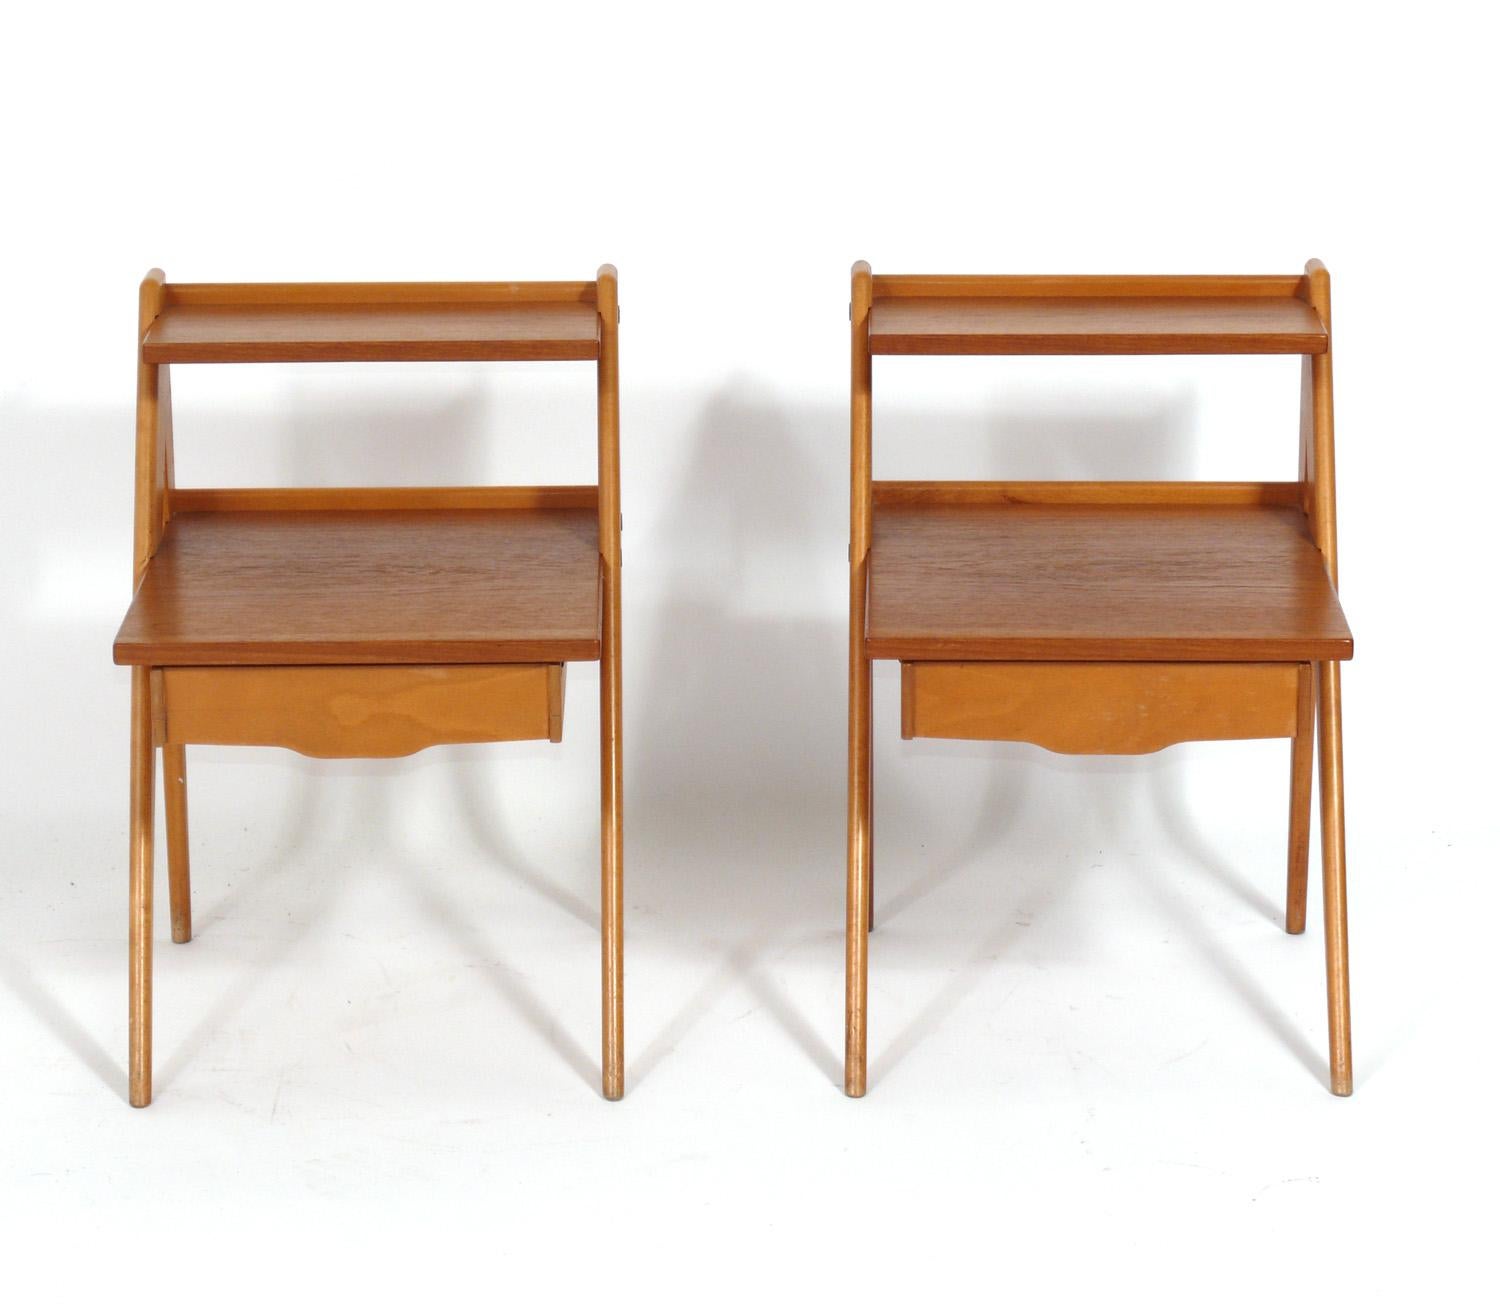 Sculptural Compass Leg Danish Modern night stands or end tables, designed by Yngve Ekström, Sweden circa 1960s. constructed of a beech wood frame with sculptural compass legs and contrasting teak tops. Each table has brass hardware and a shallow